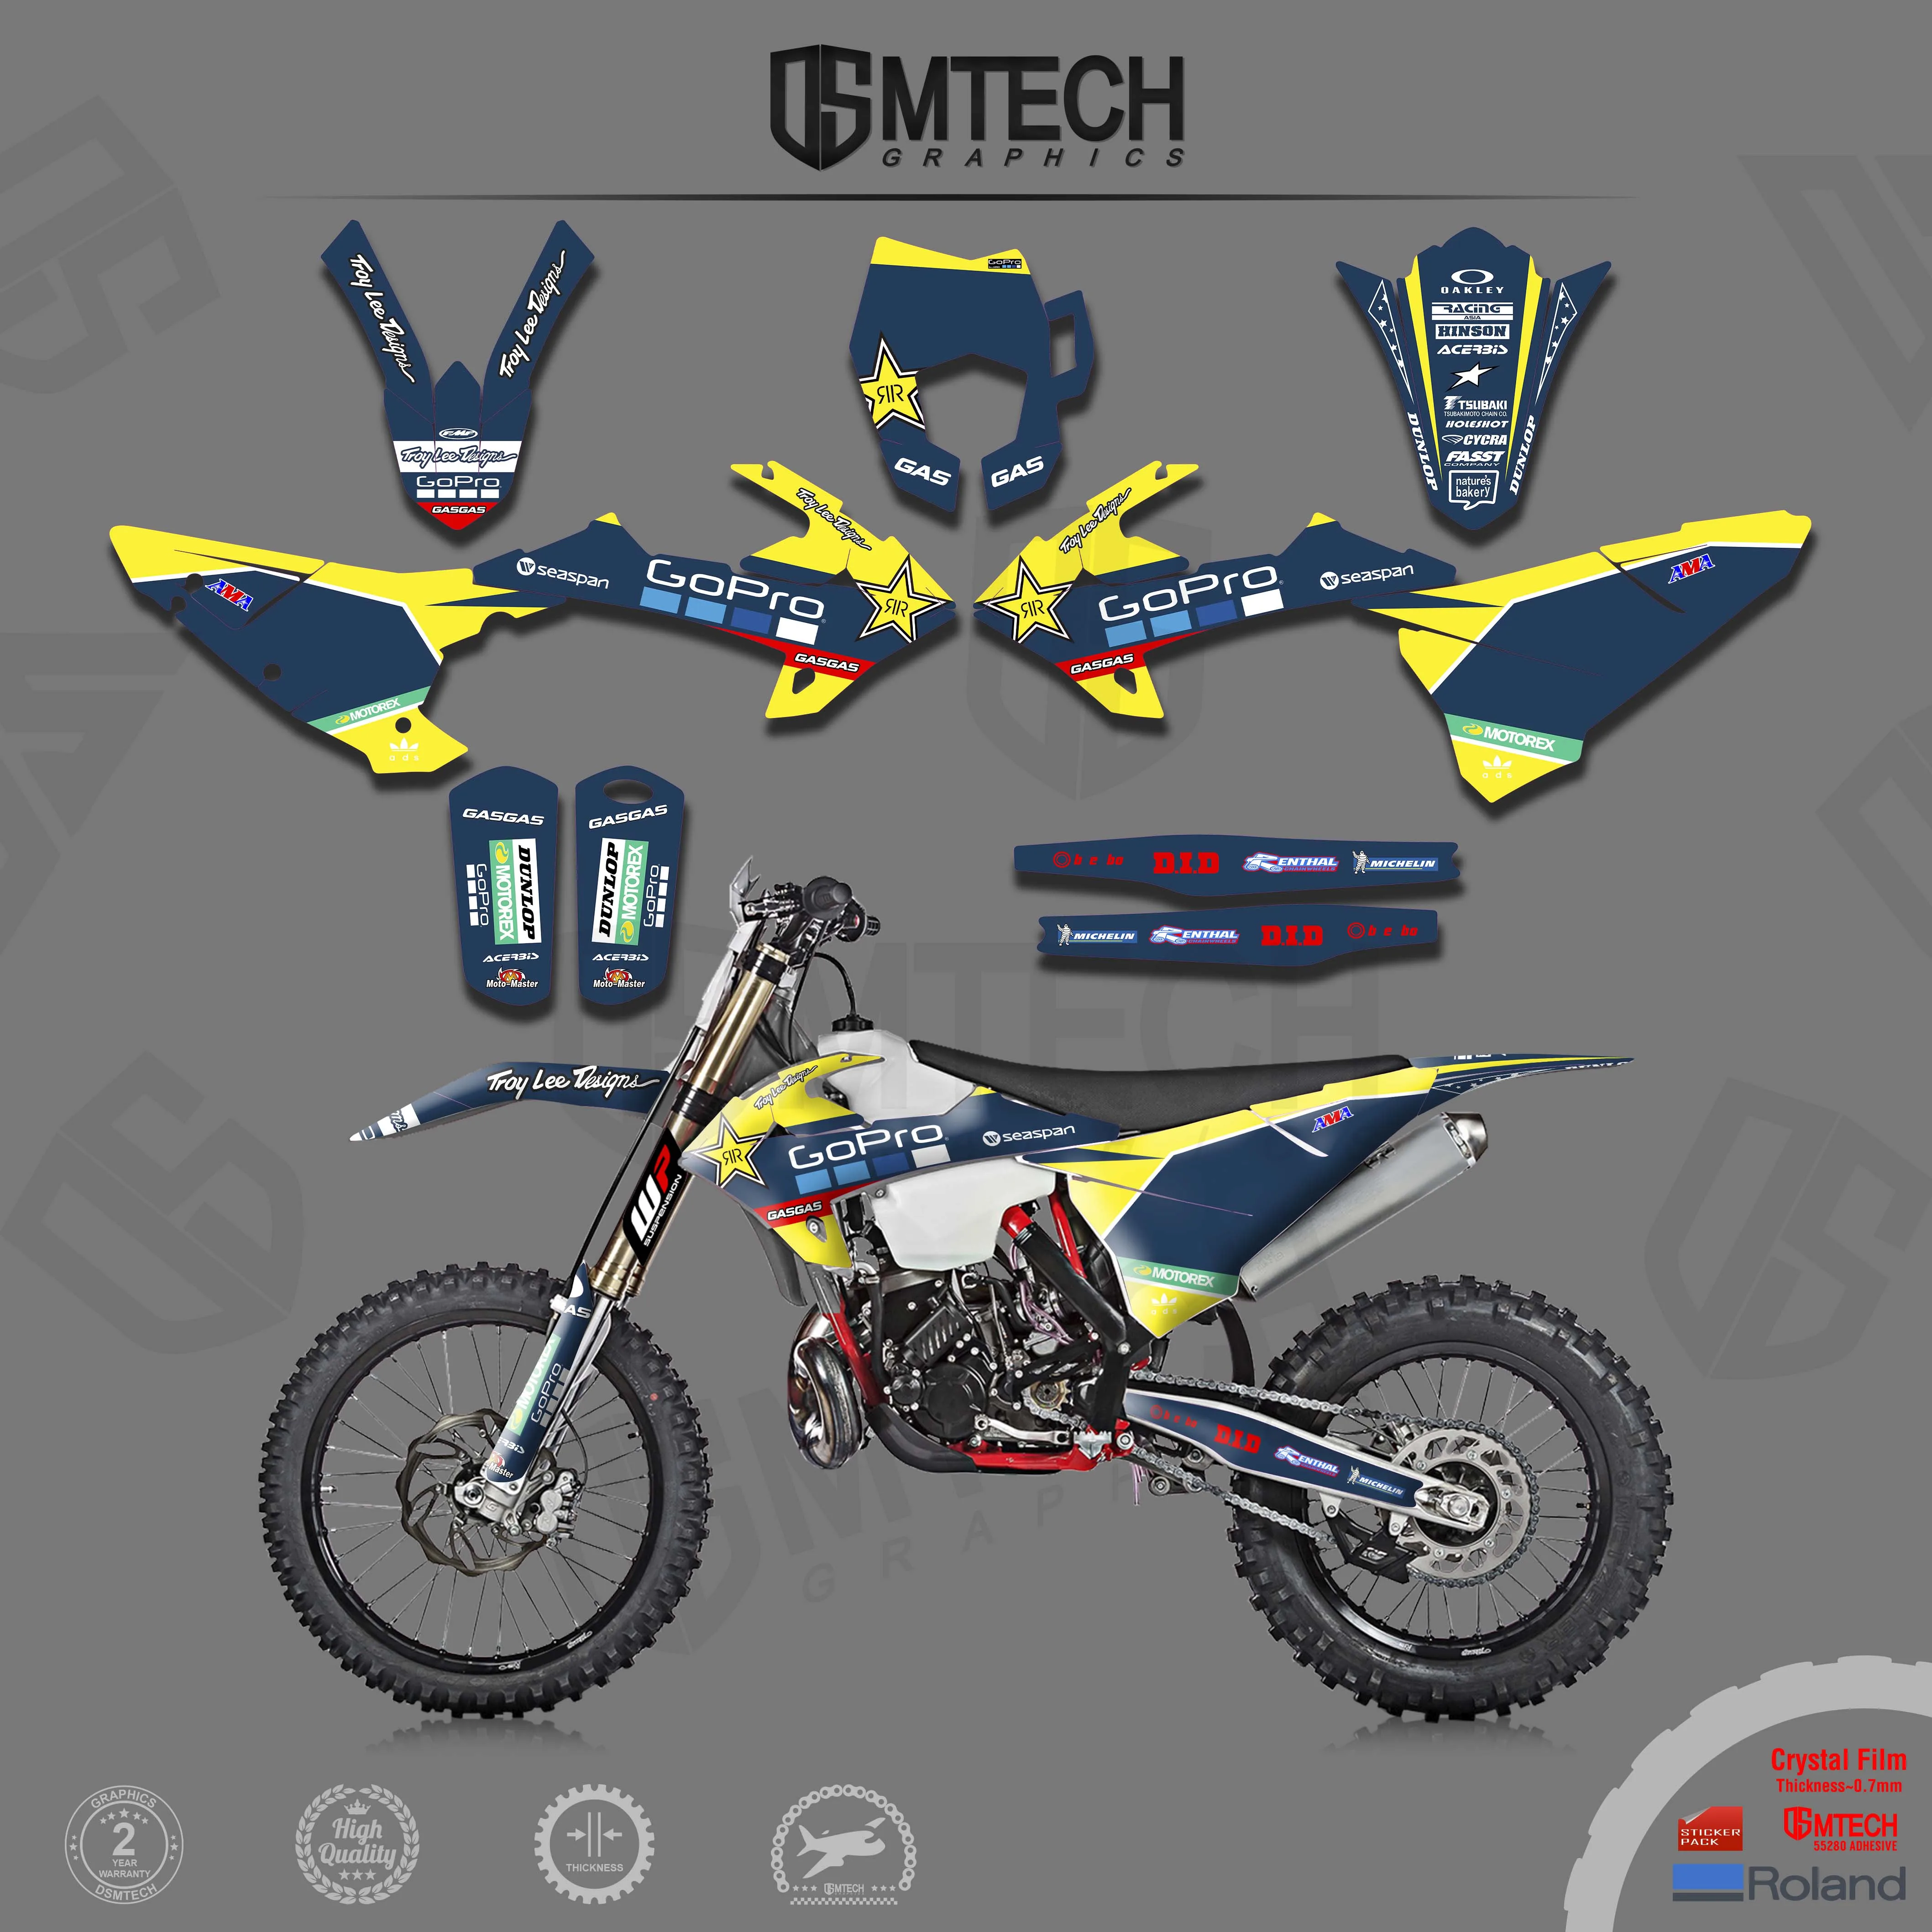 DSMTECH Team Motorcycle Sticker Graphic Decal Kit for GASGAS EC 2018 2019 2020 18-20